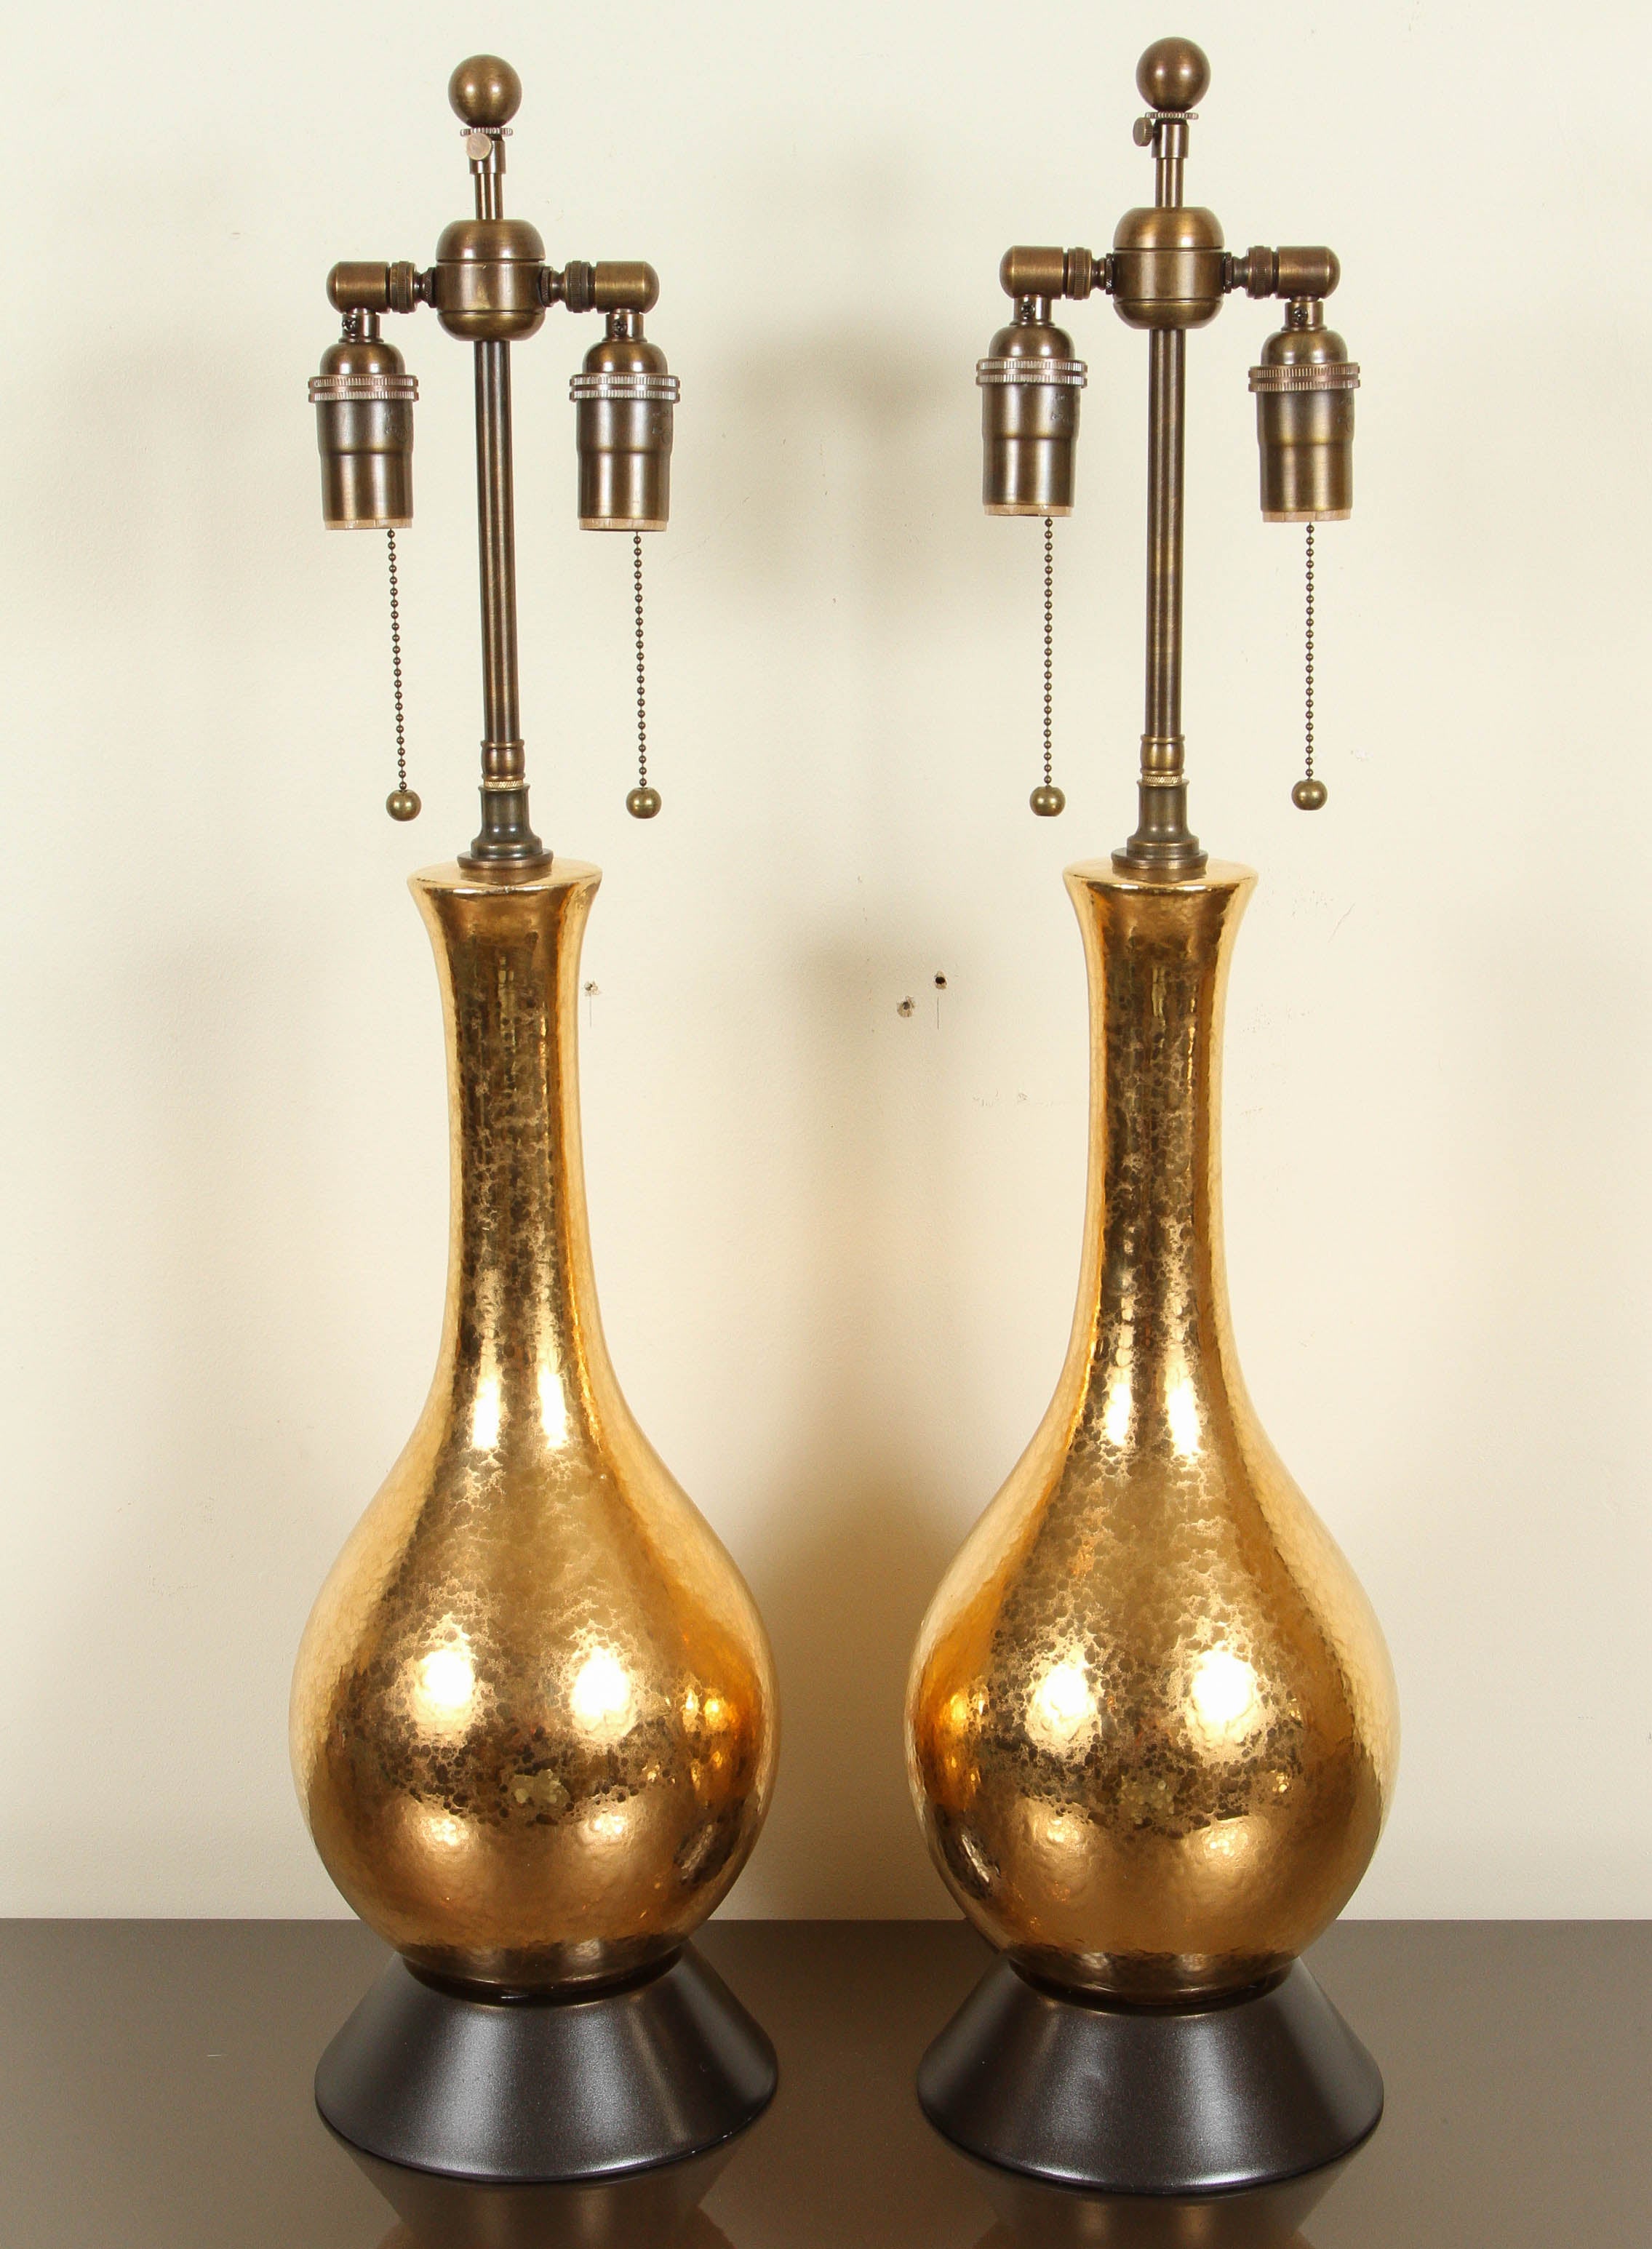 Pair of ceramic table lamps with a beautiful gold crackled glaze finish.
The lamp bodies sit upon bronze finished tapered bases and they have been newly rewired with bronze finished double clusters.